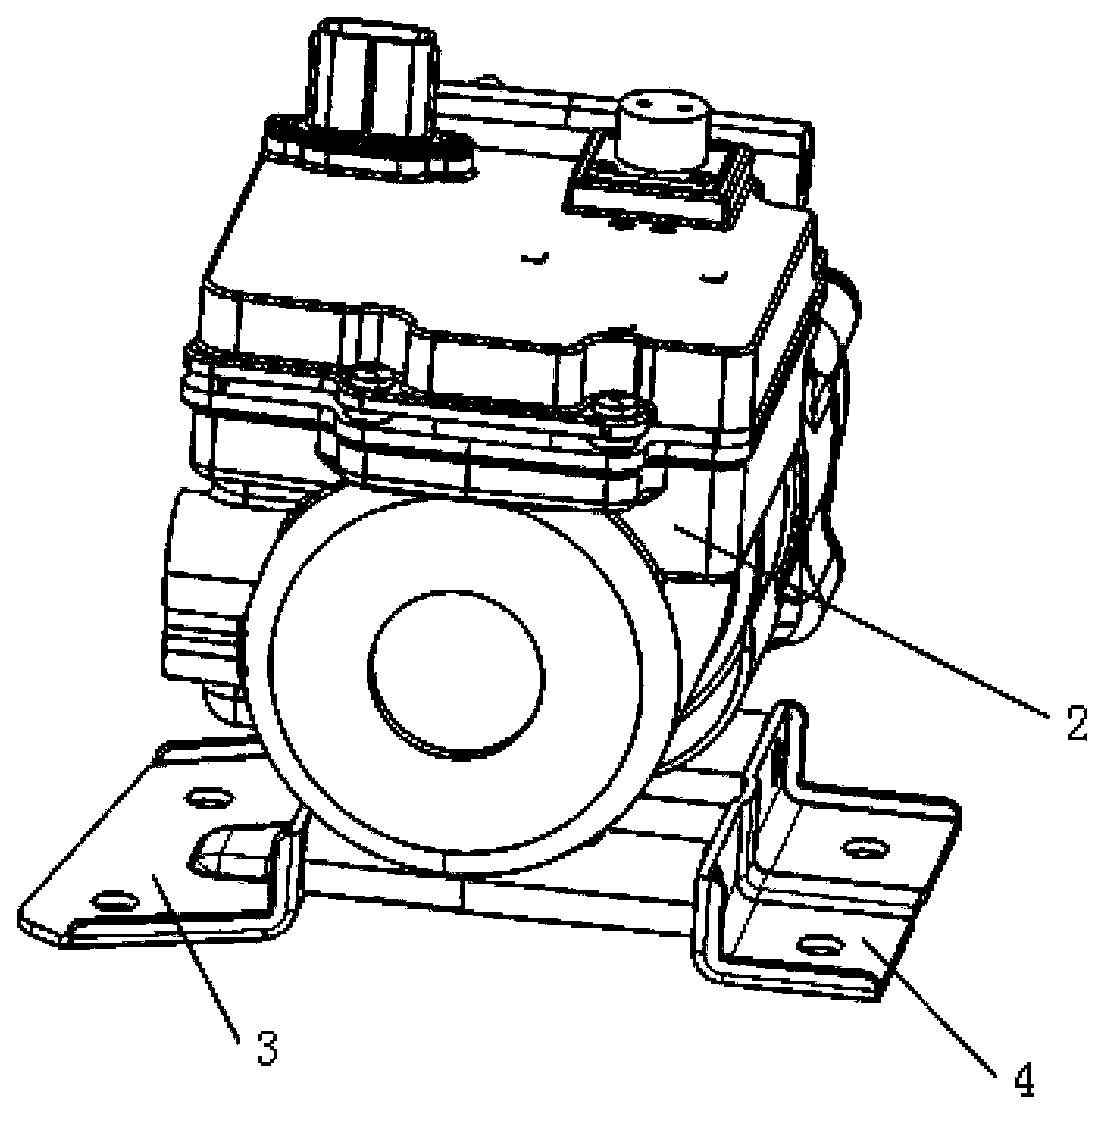 Fixing support connecting structure of air conditioner compressor